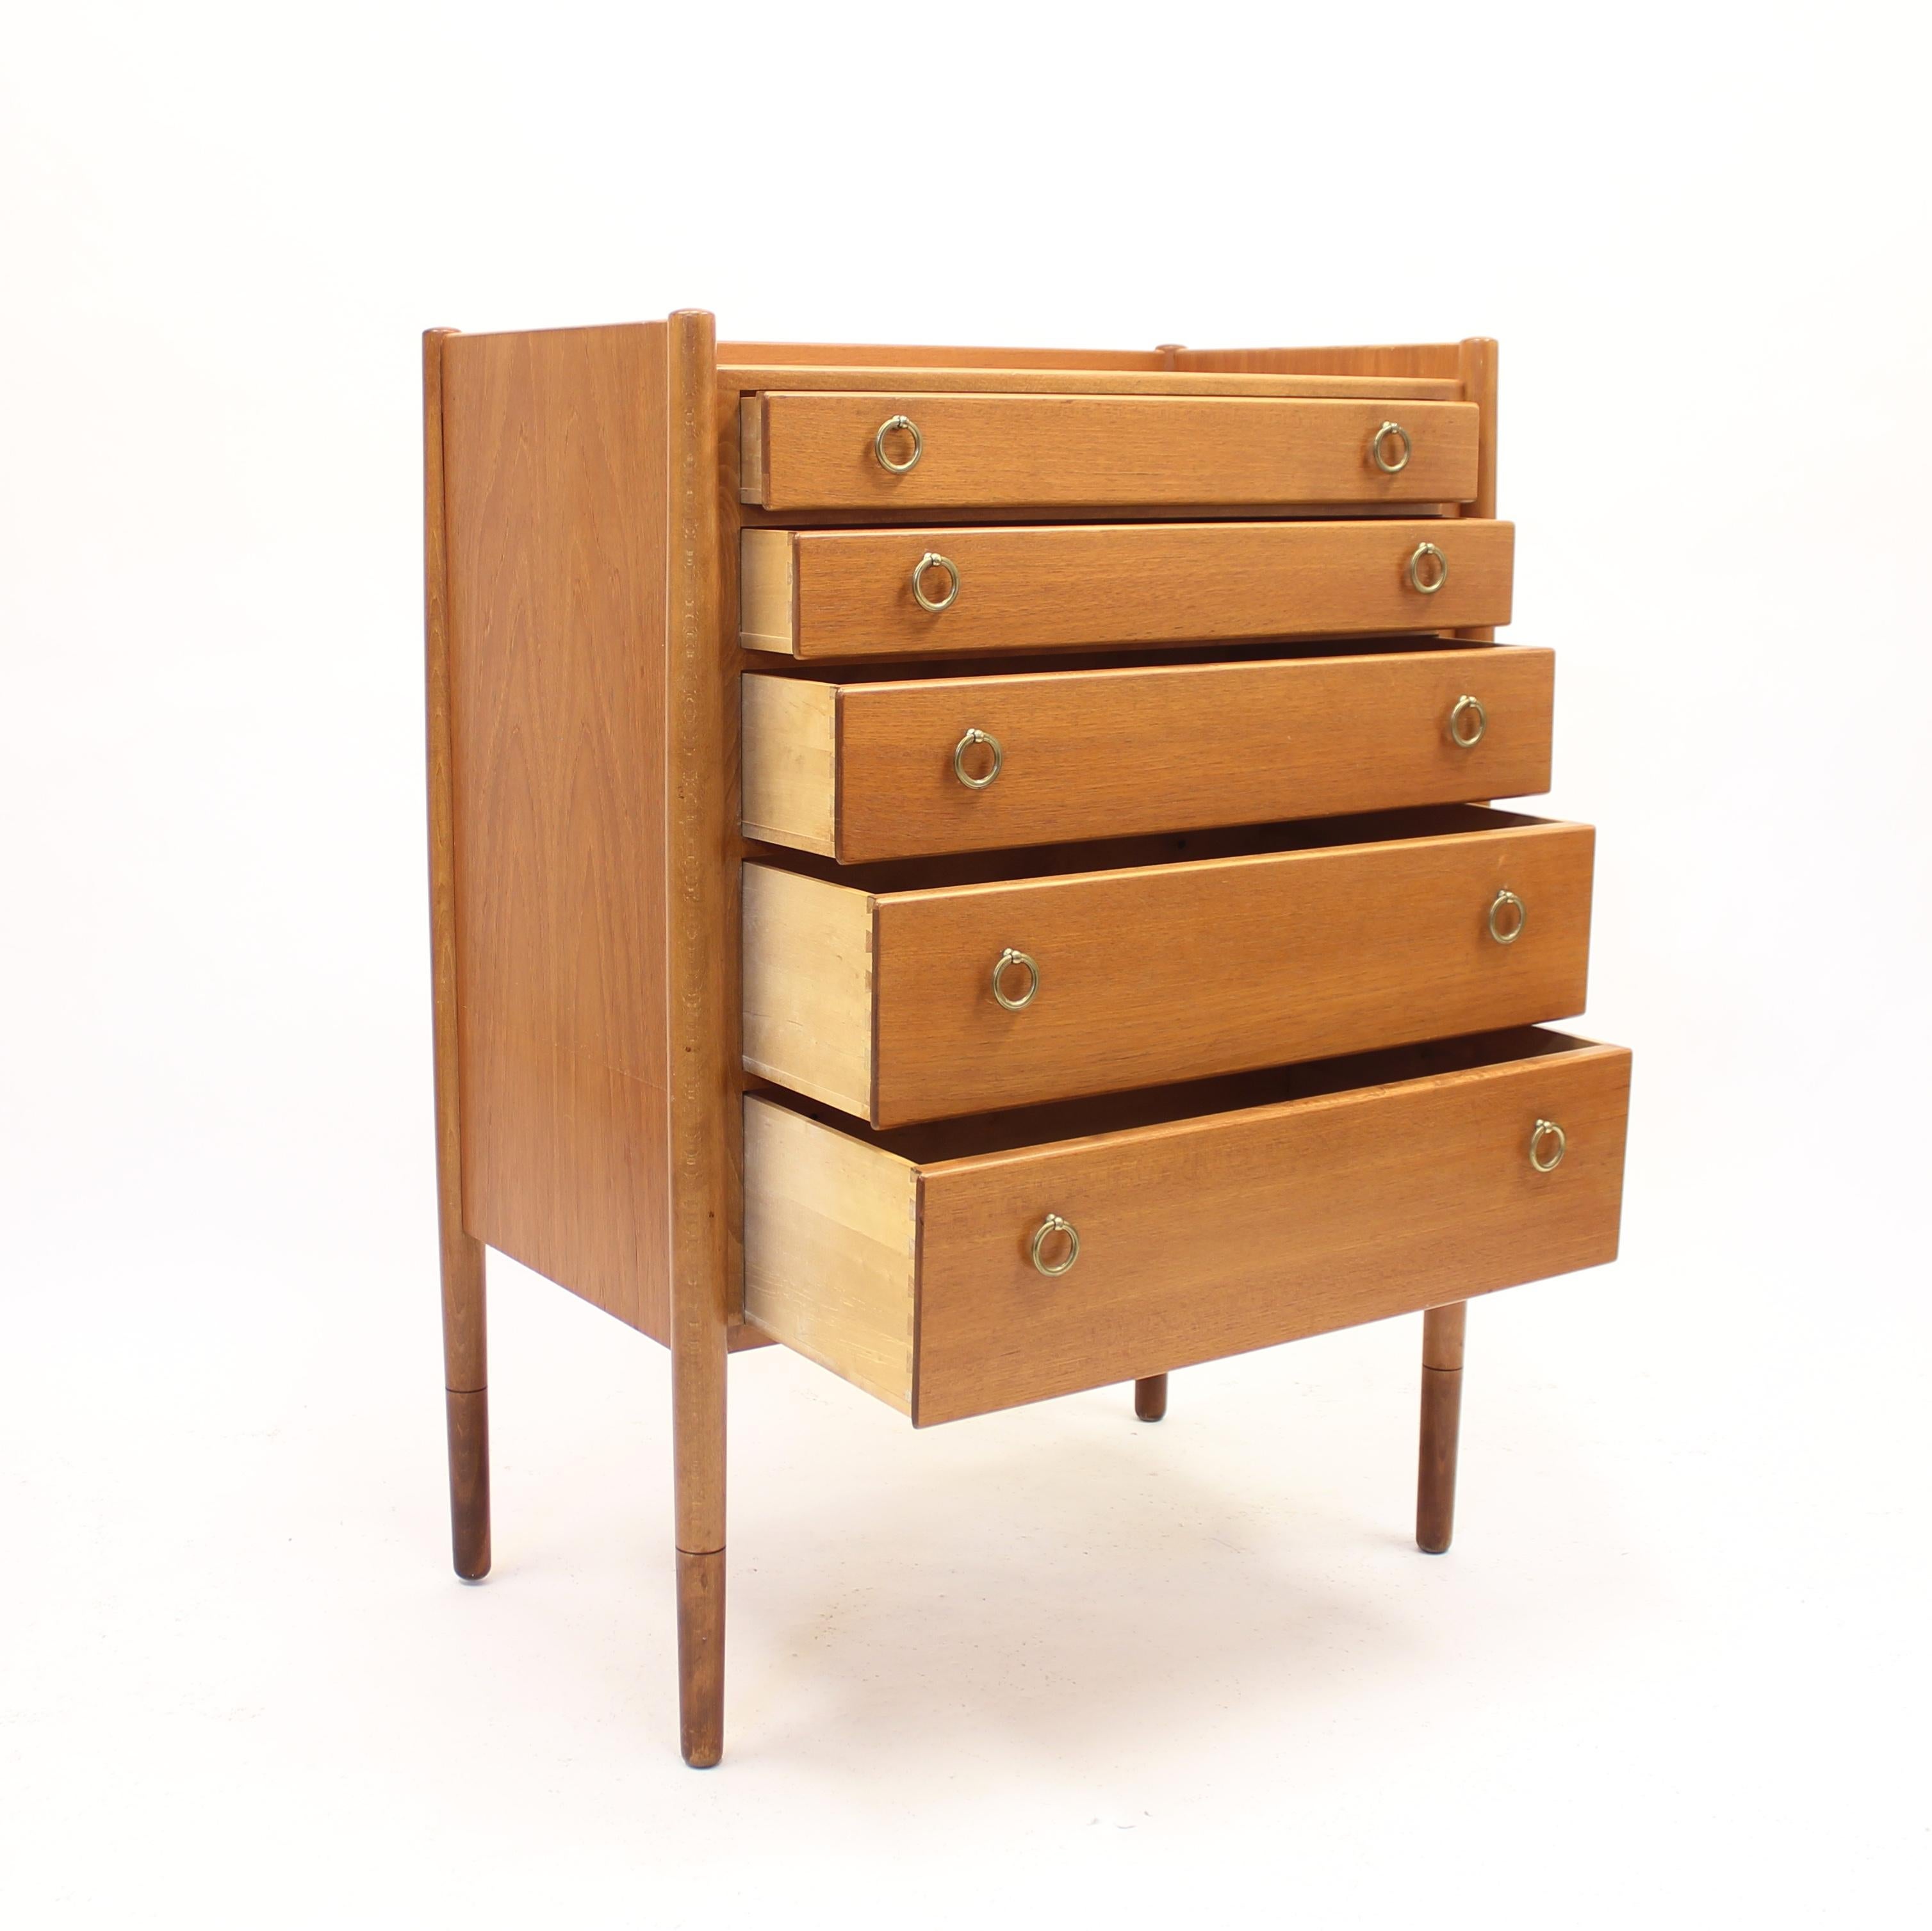 20th Century Swedish Mid-Century Teak Chest of Drawers by Treman, 1960s For Sale